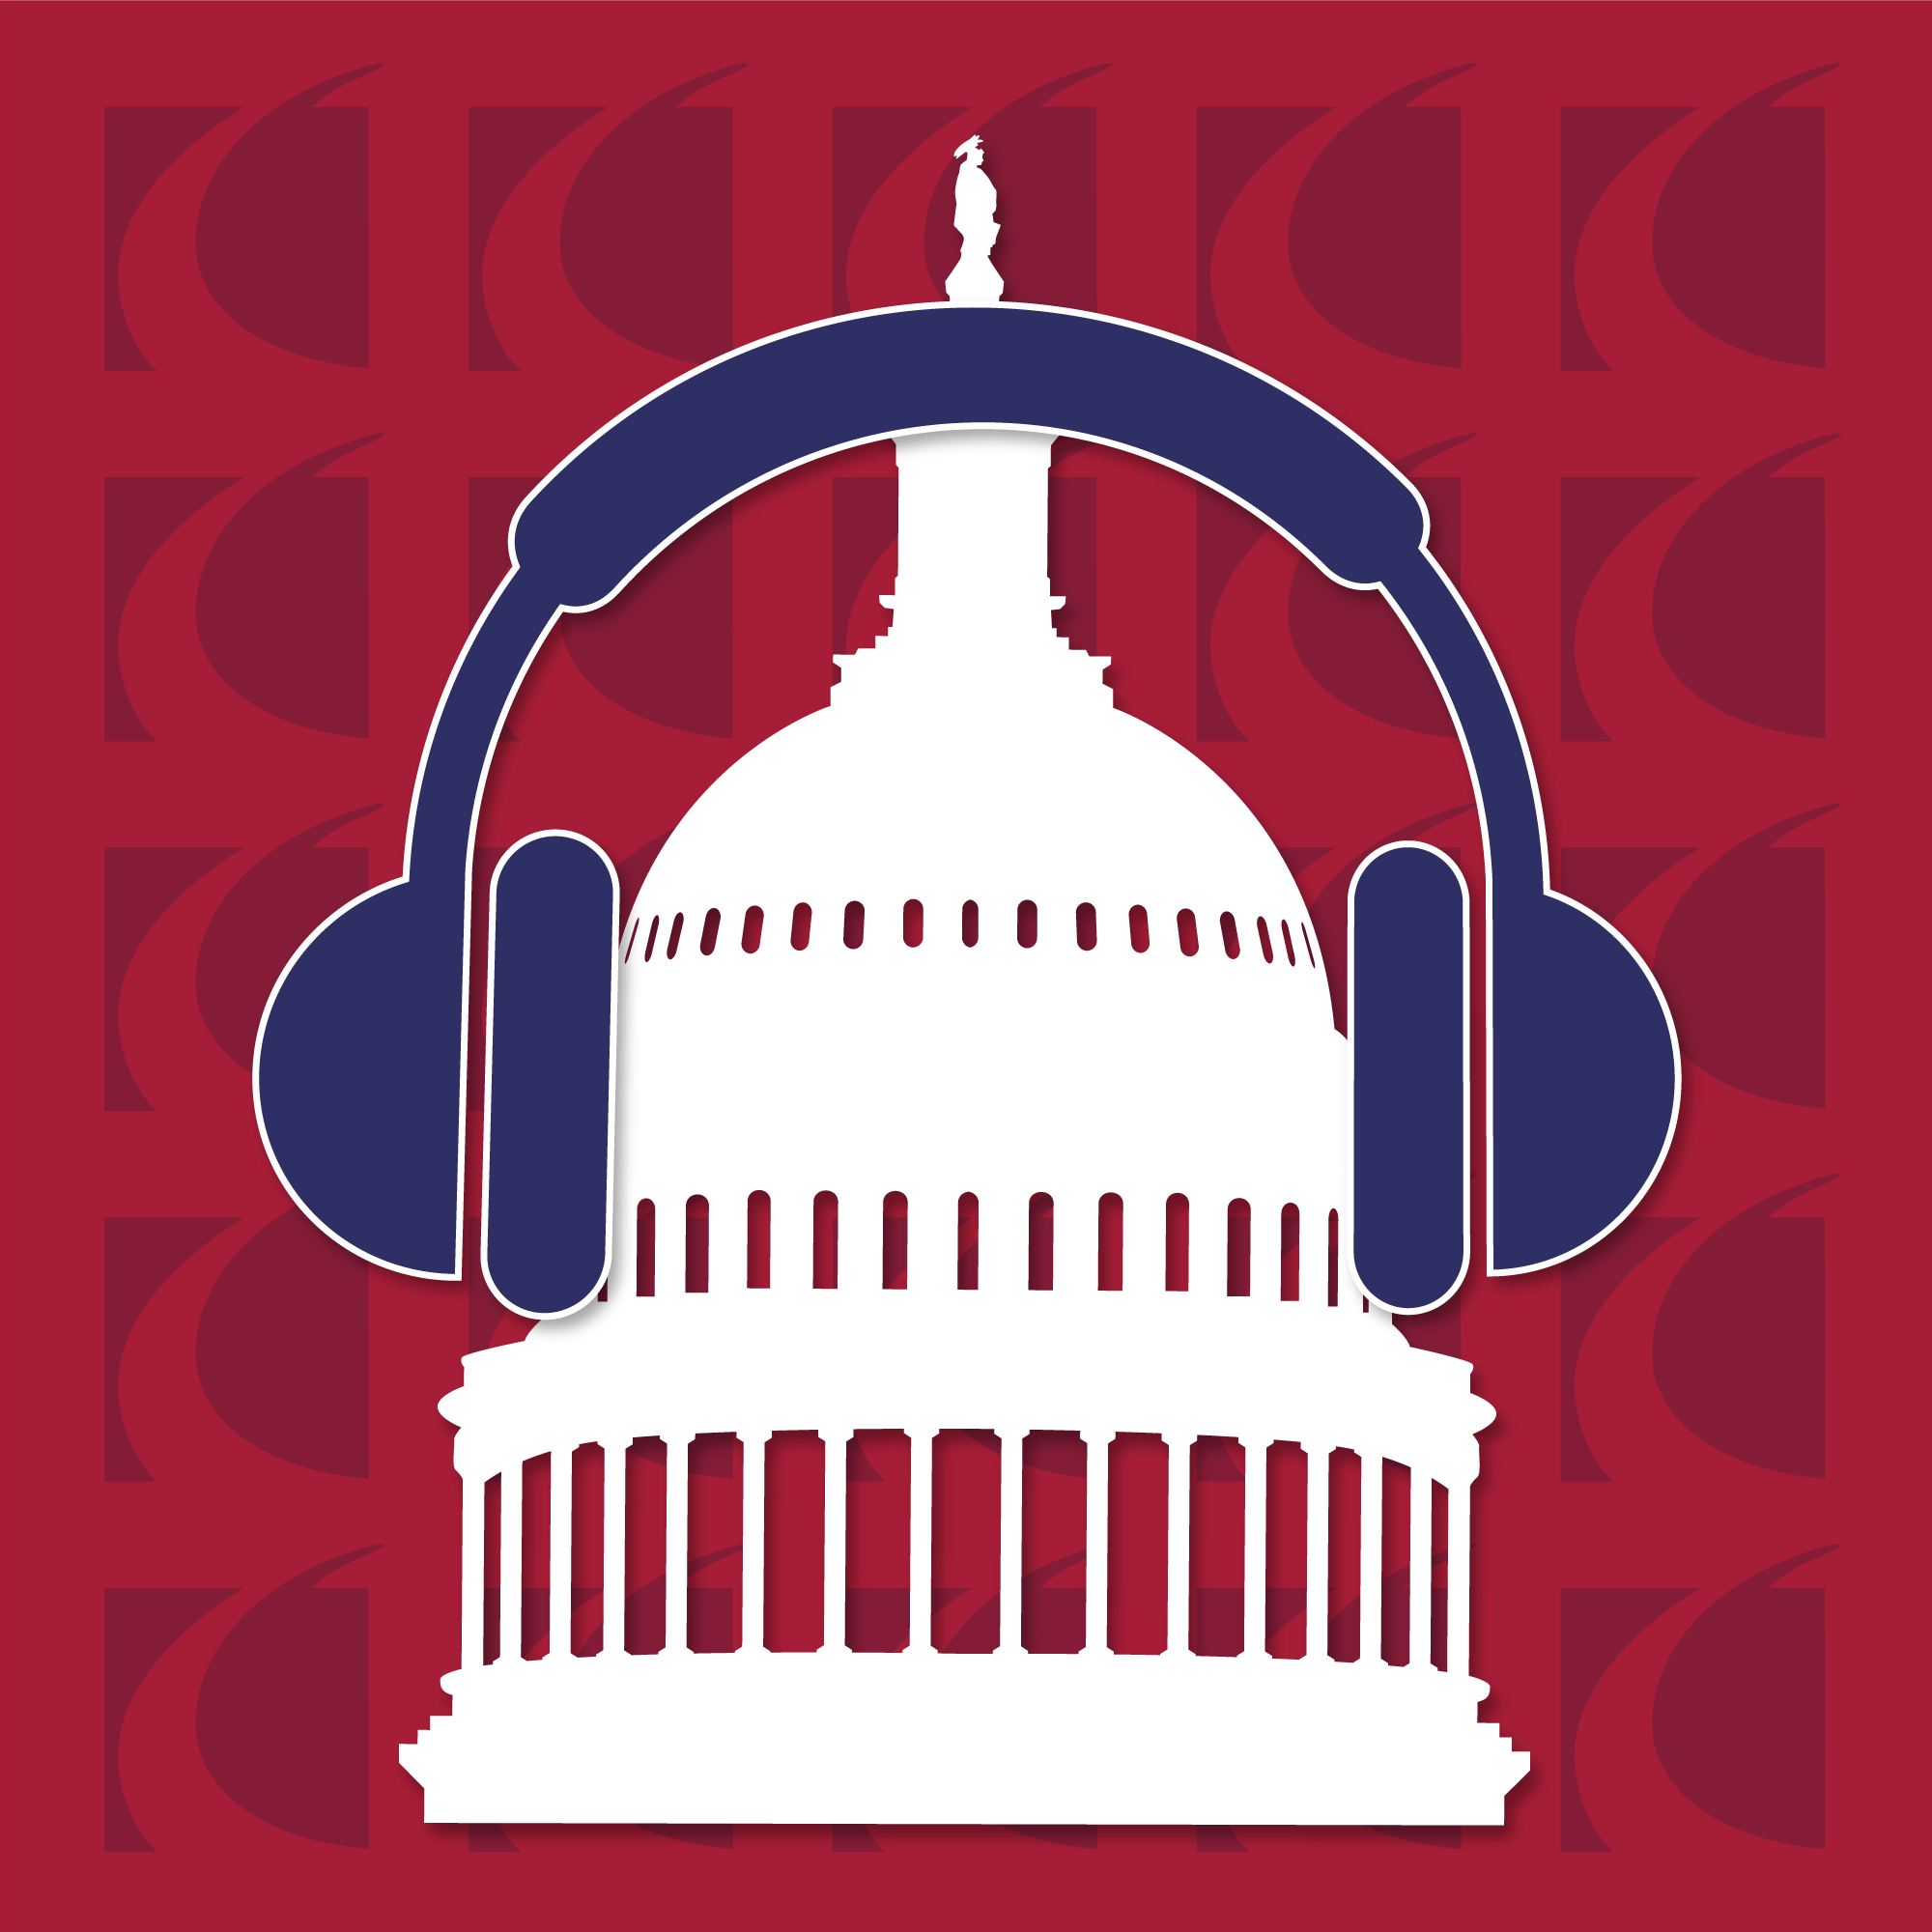 July 14: Fastest 5 Minutes, The Podcast Gov’t Contractors Can’t Do Without - Crowell & Moring LLP